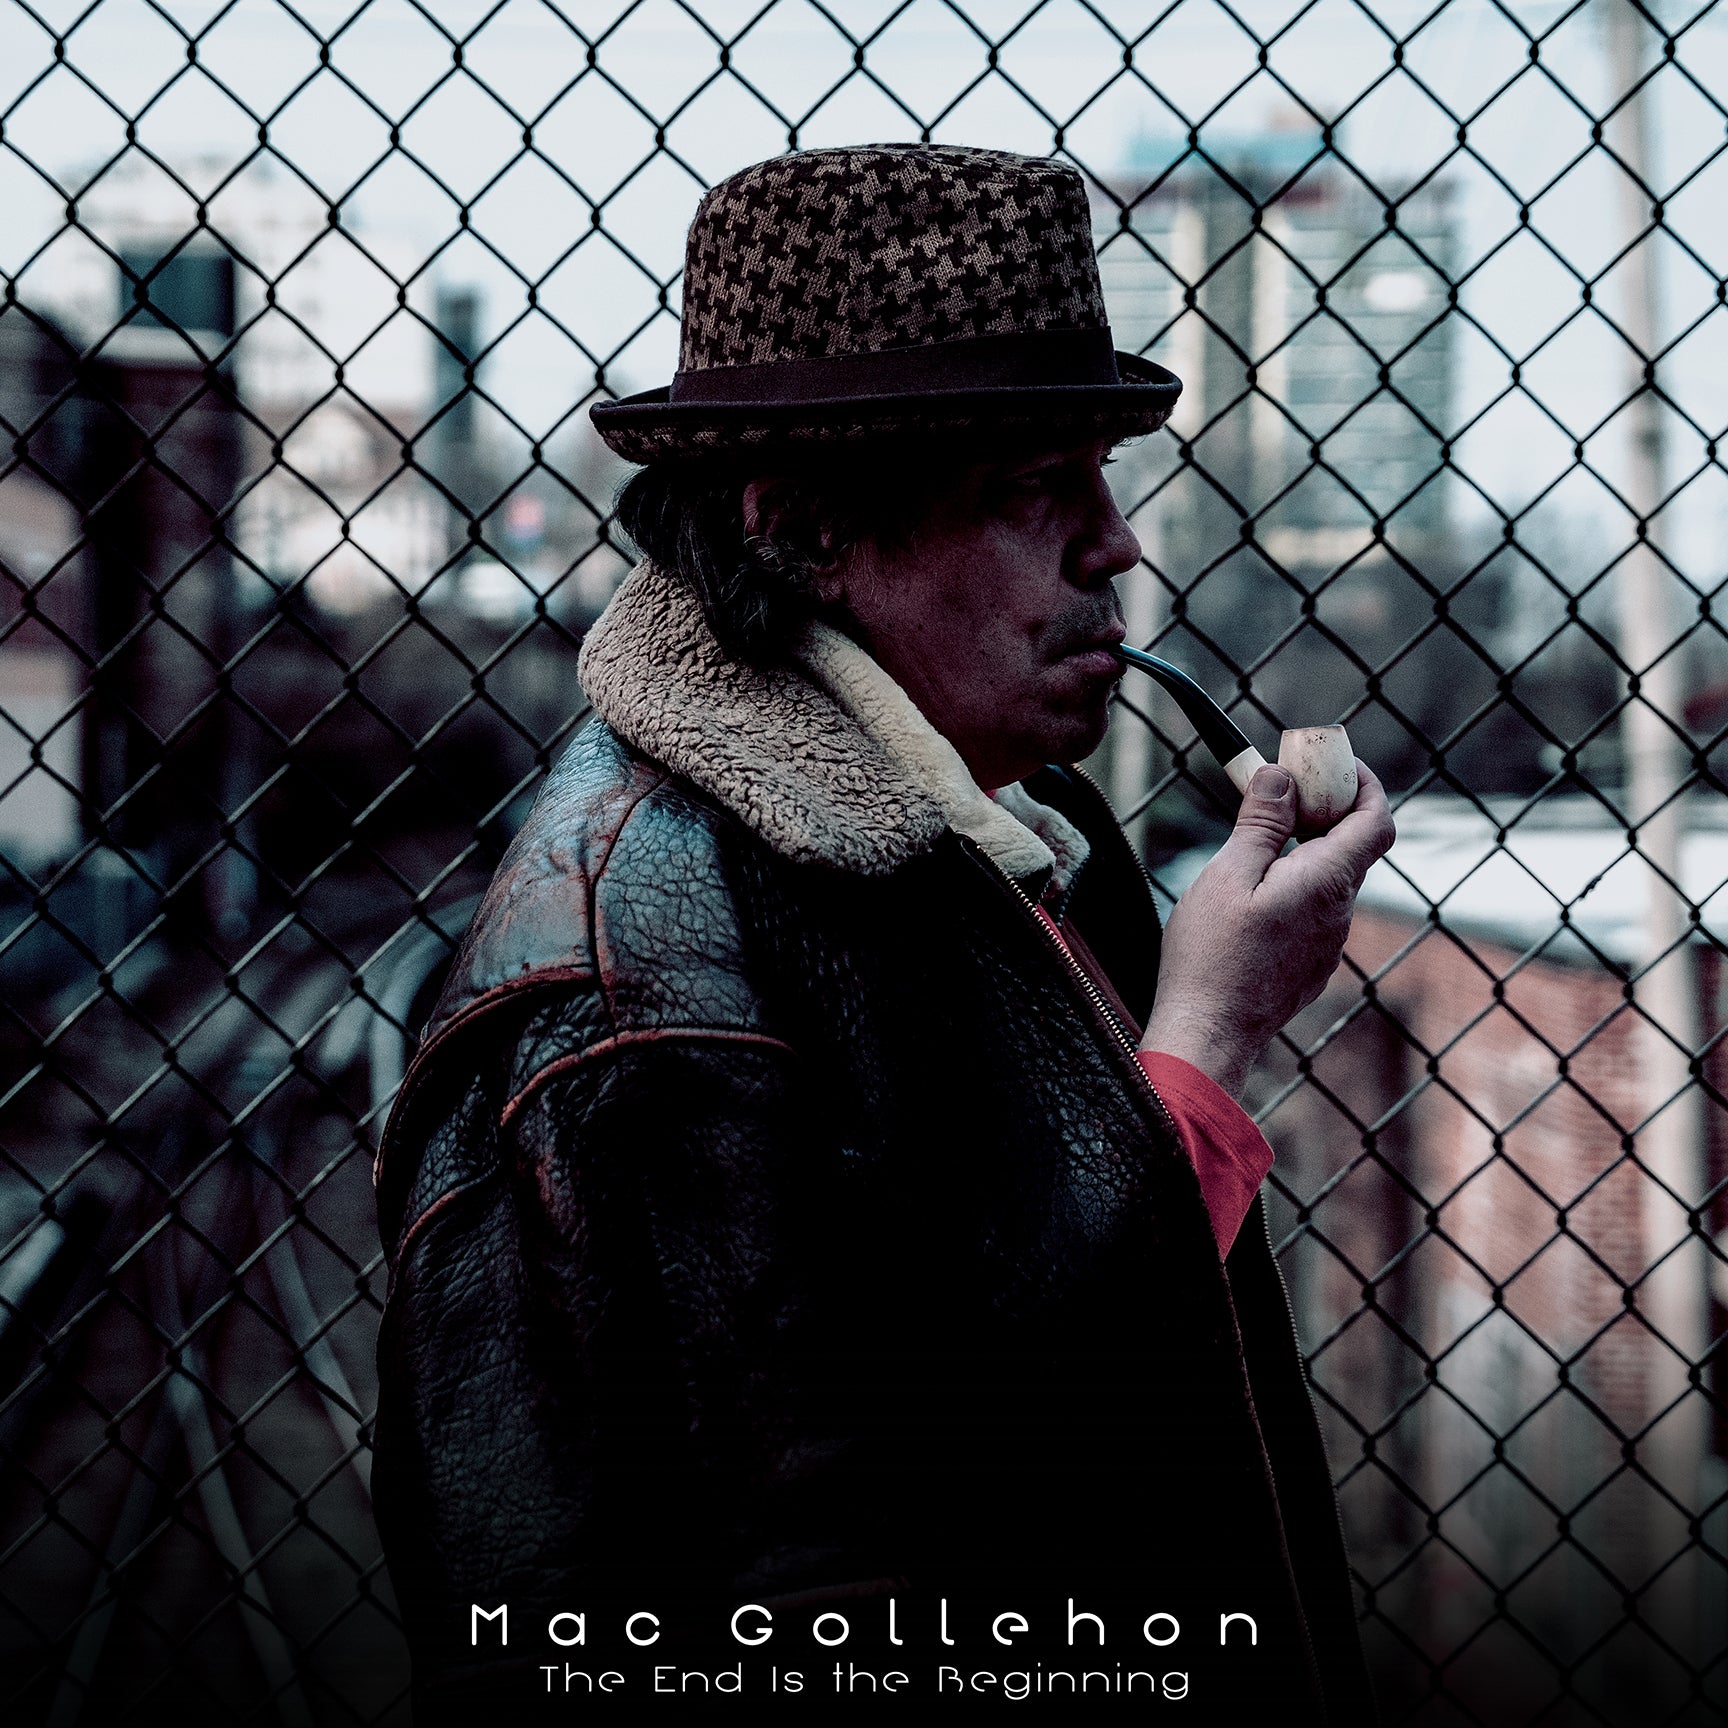 MAC GOLLEHON - The End Is the Beginning